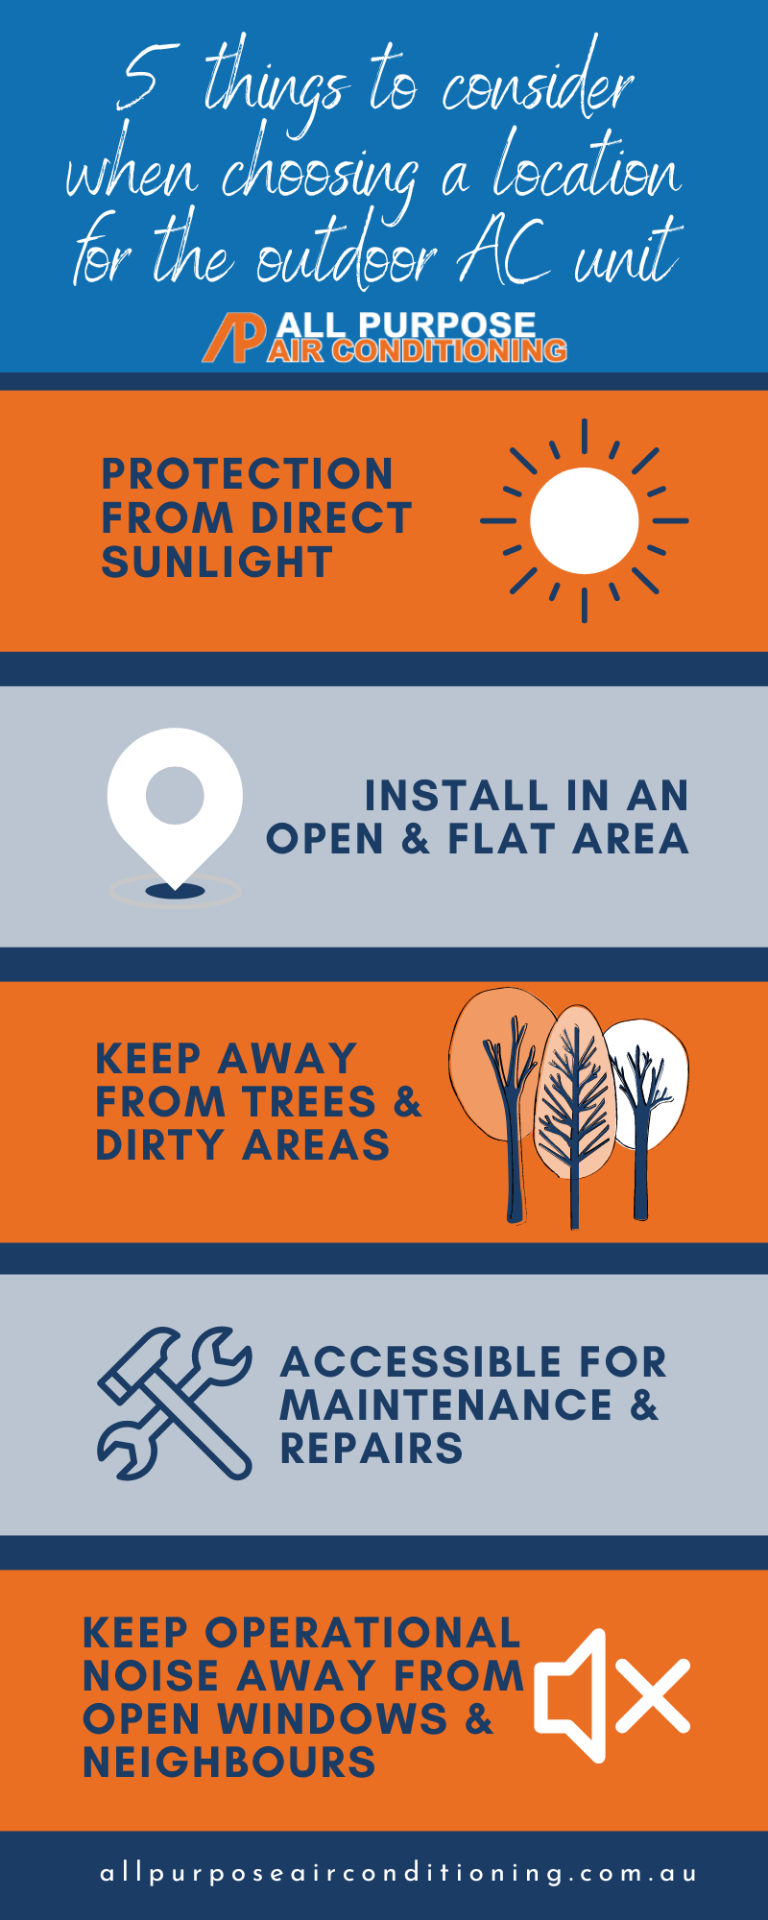 Infographic of 5 points to consider when choosing the location for an outdoor AC unit